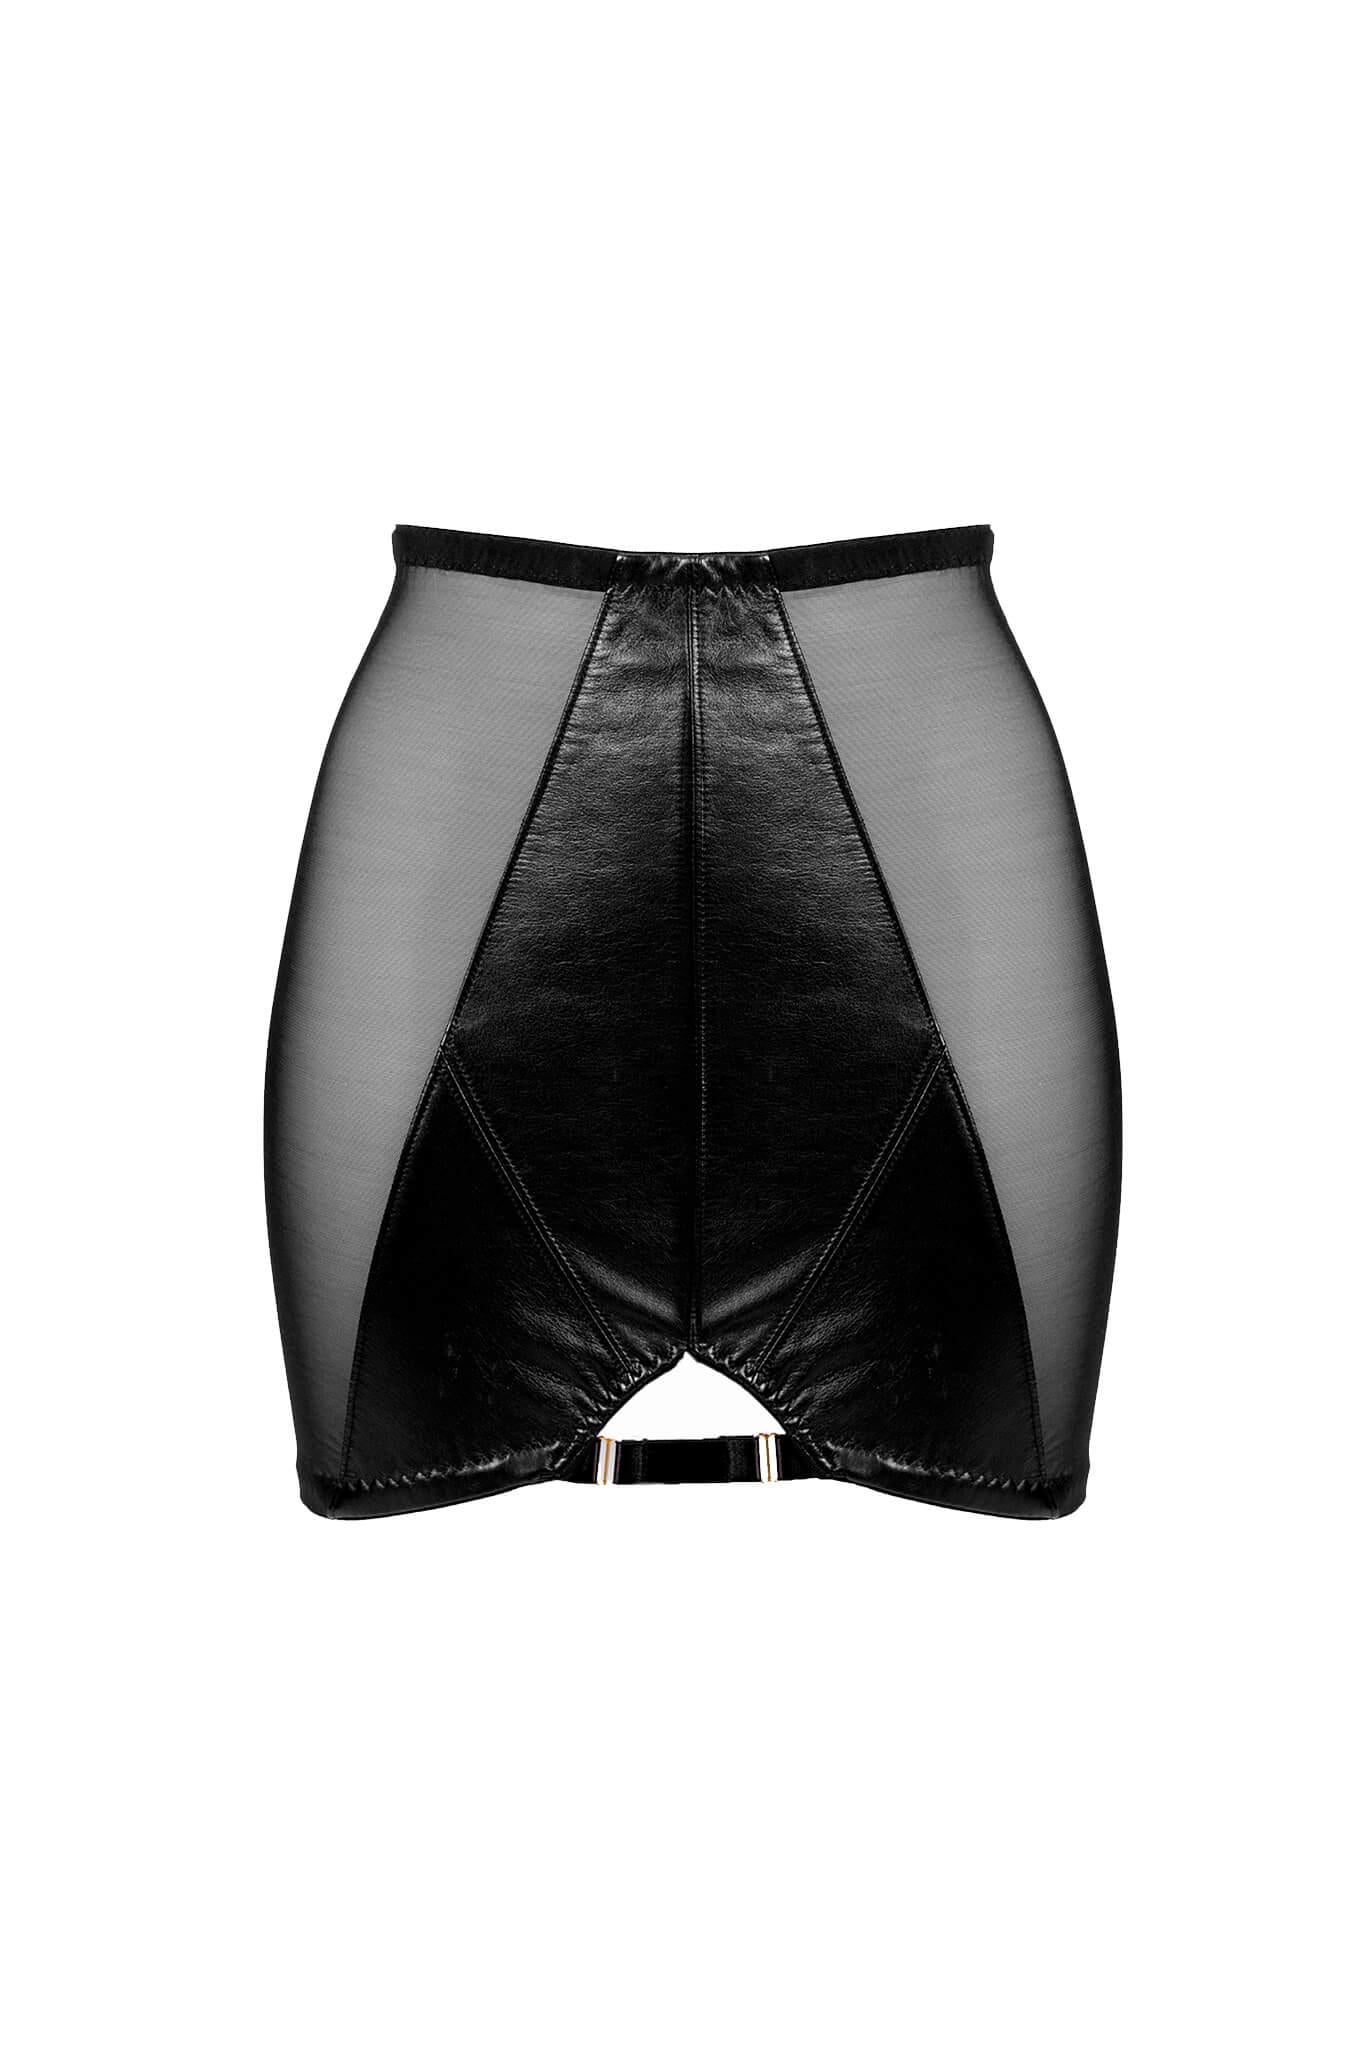 Montana Real Black Leather Skirt • Something Wicked British Lingerie ...